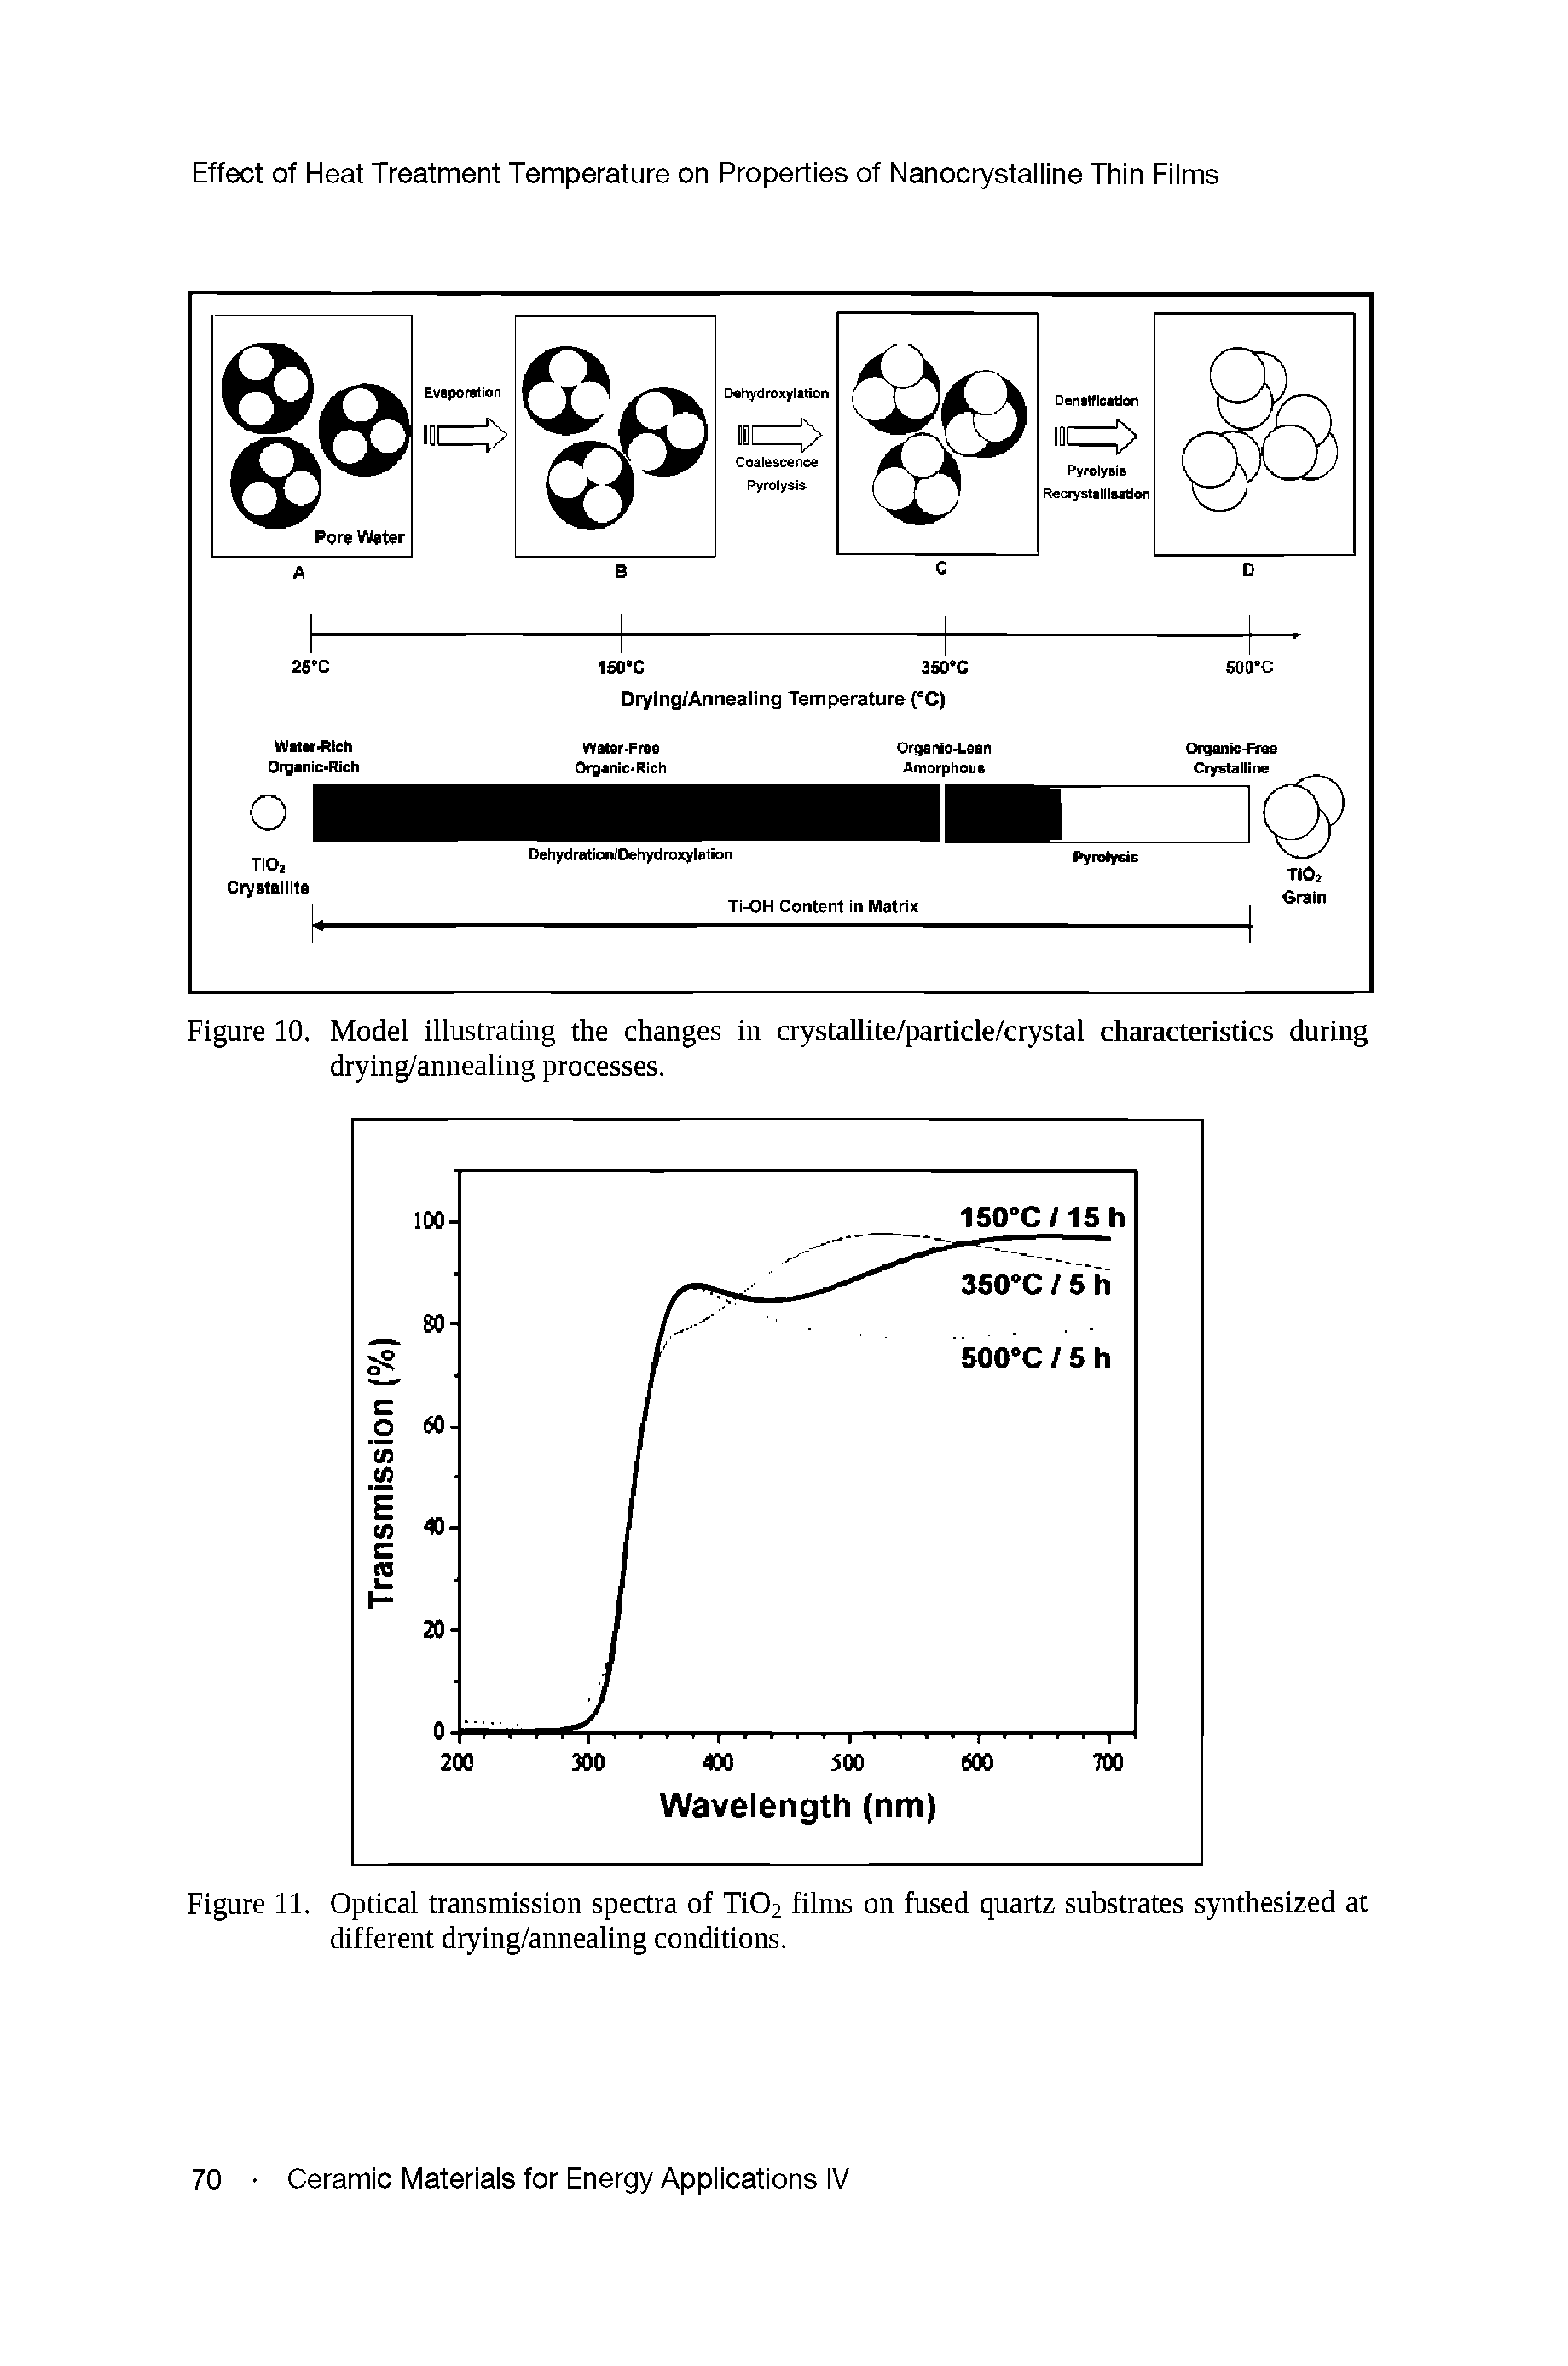 Figure 10. Model illustrating the changes in crystallite/particle/crystal characteristics during drying/annealing processes.